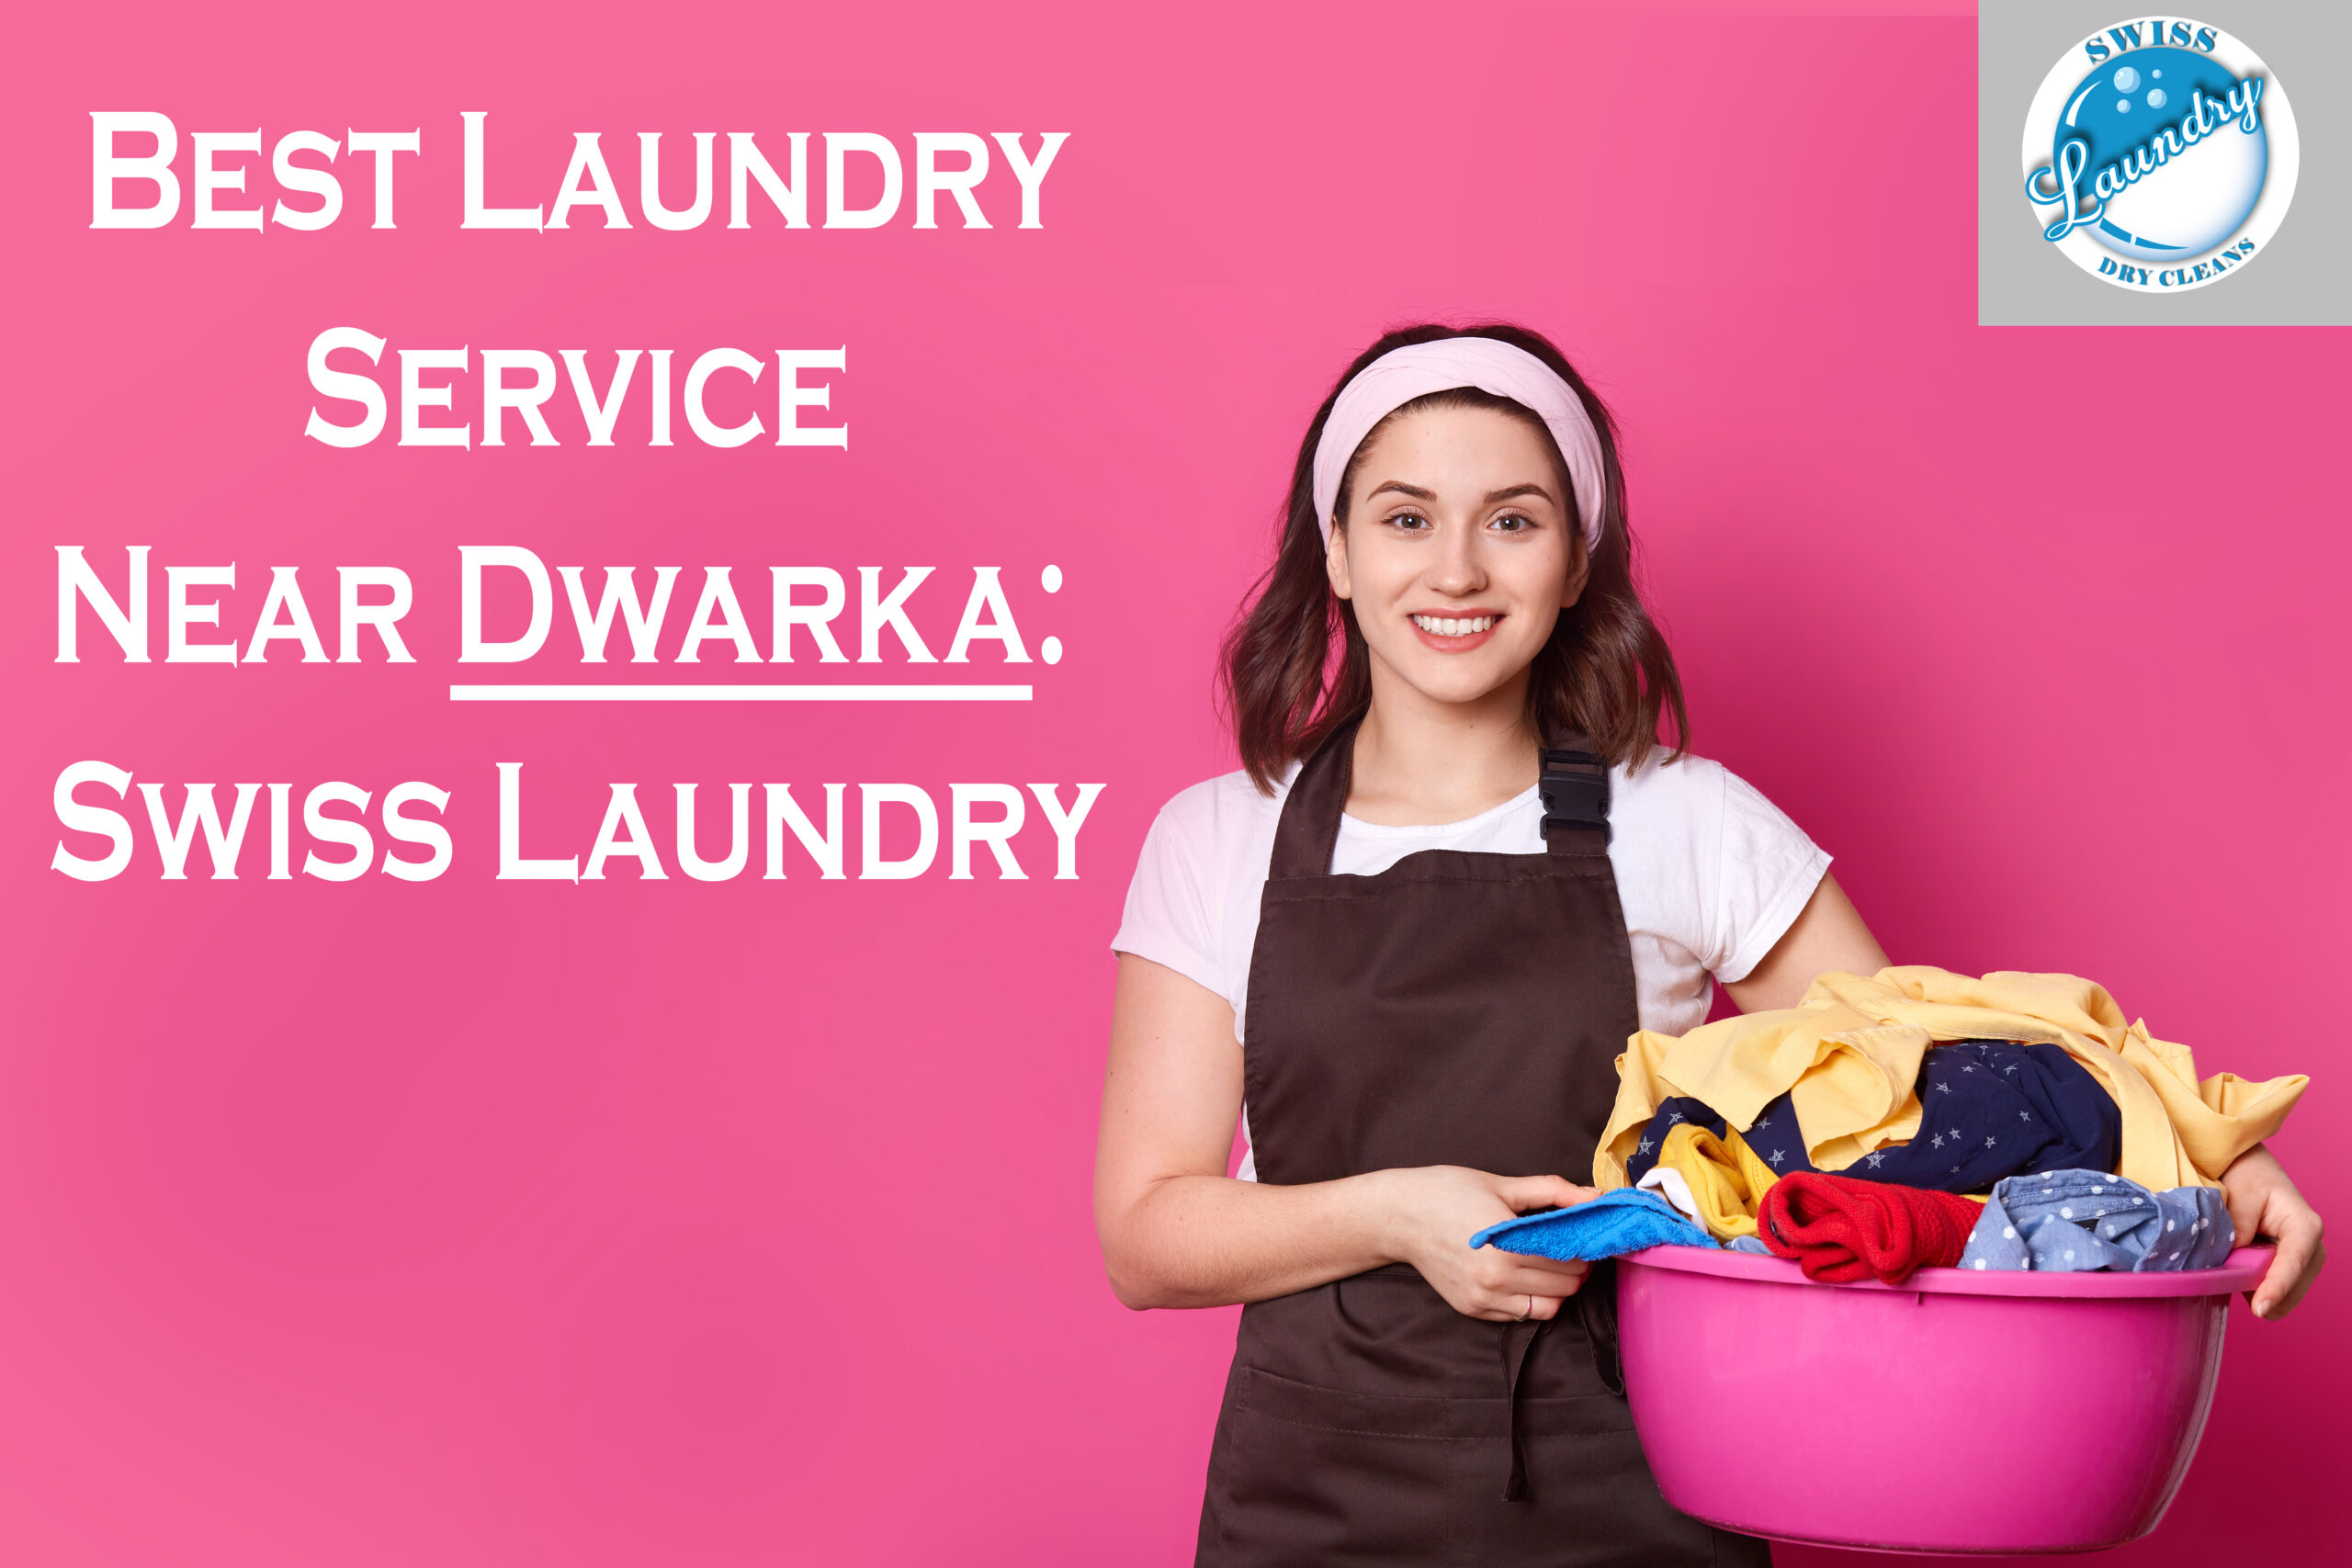 The Best Laundry Service Near Dwarka: Swiss Laundry and Dry Cleaners